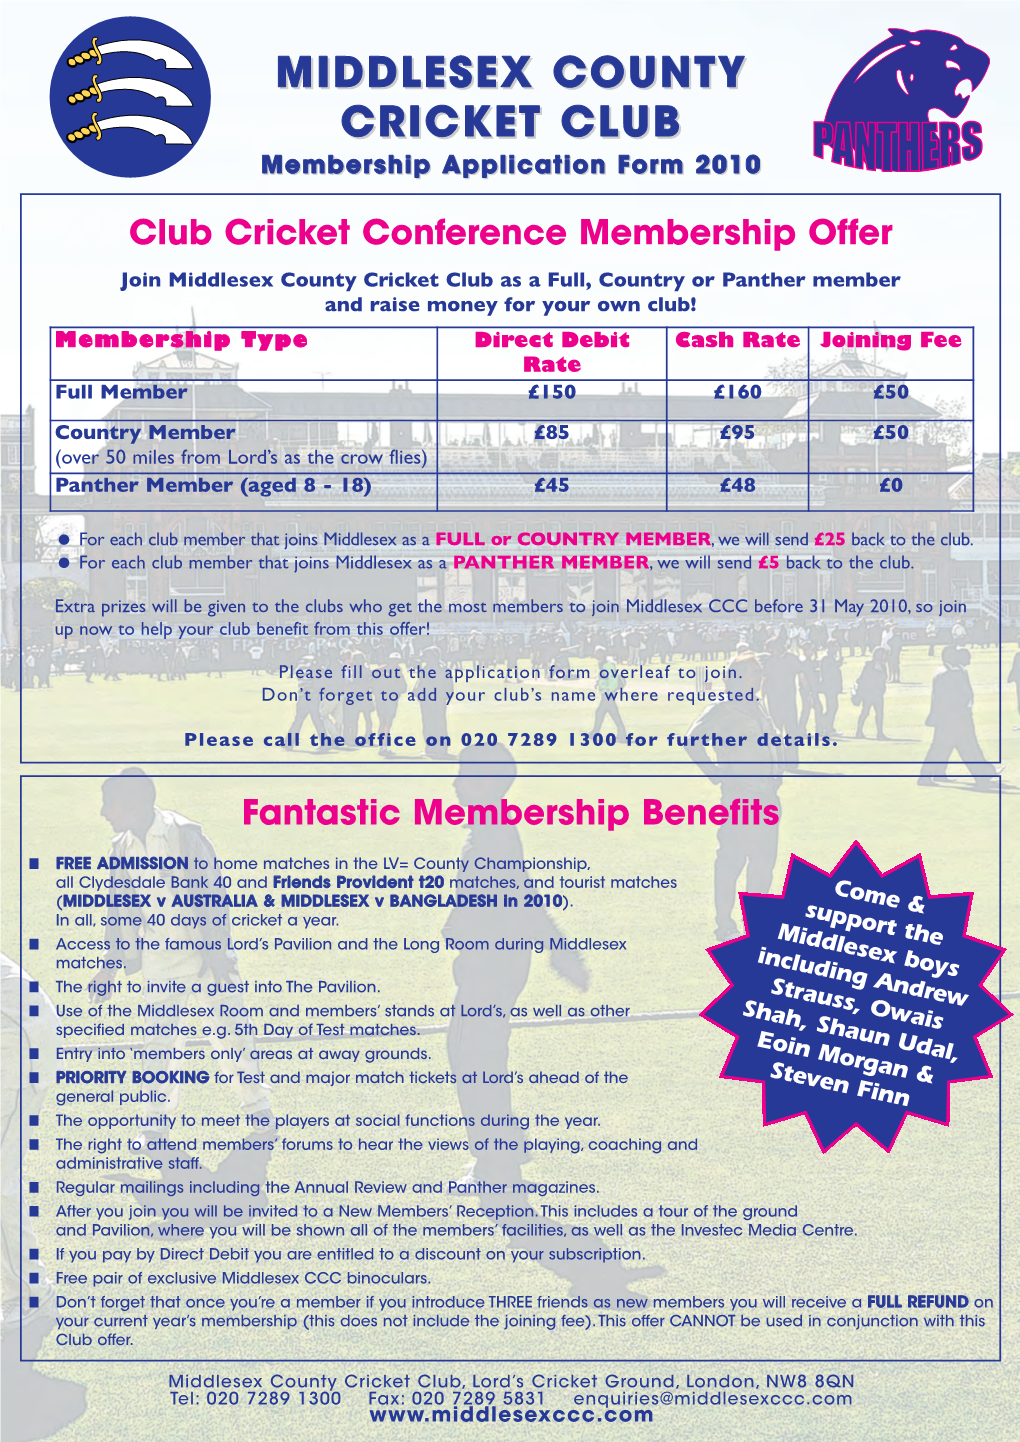 Middlesex County Cricket Club As a Full, Country Or Panther Member and Raise Money for Your Own Club!